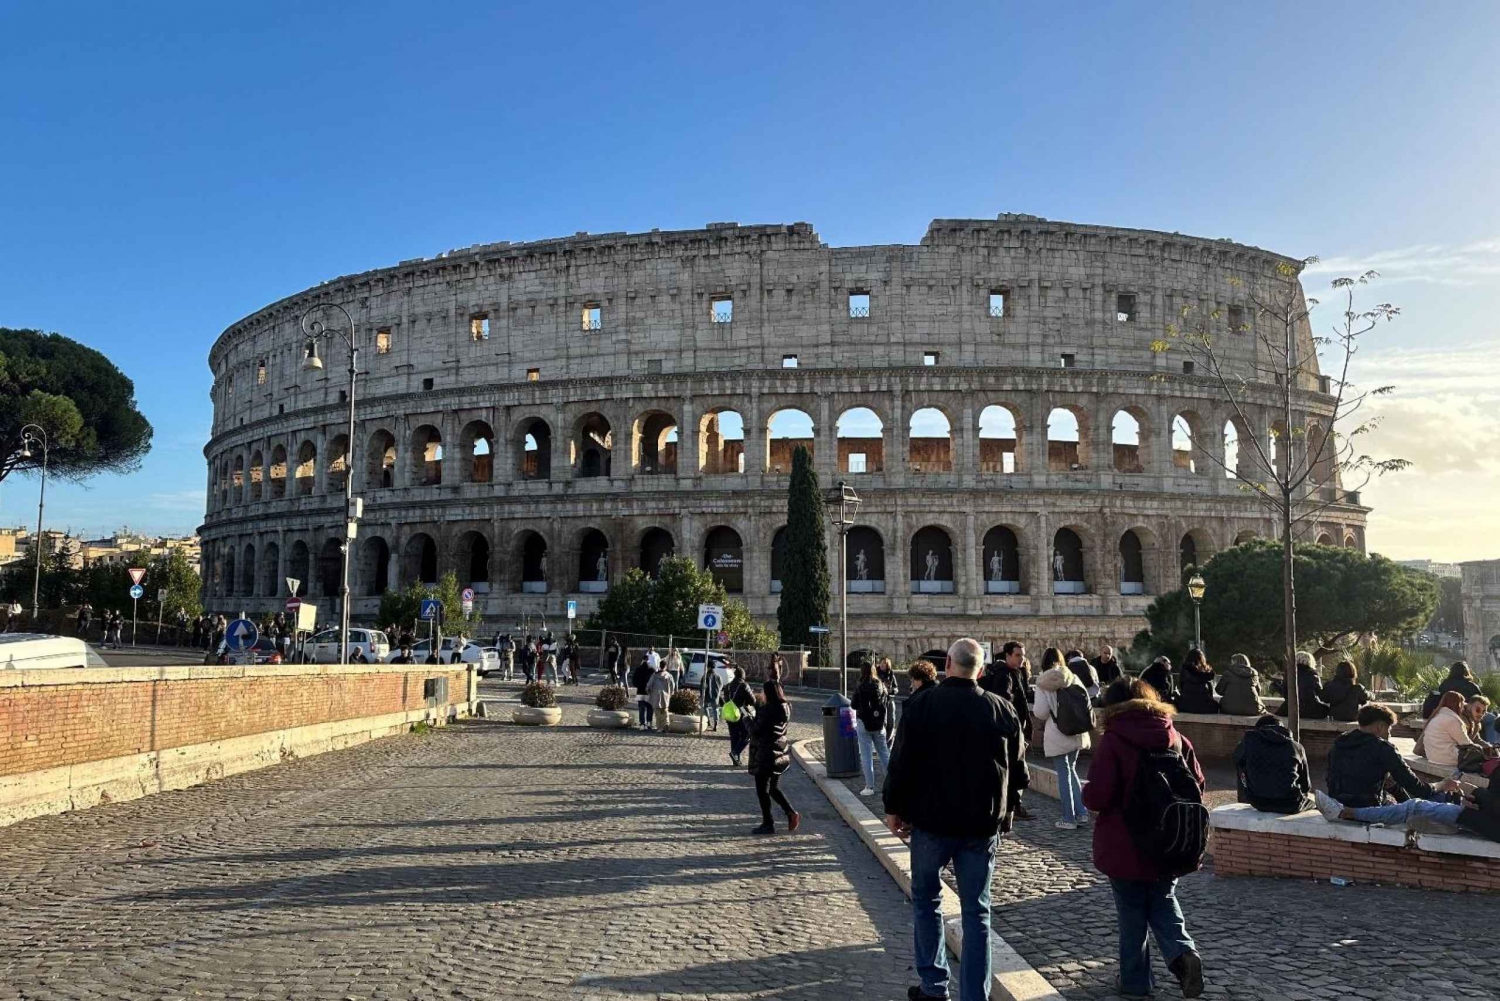 Colosseum Fast-track Entry Ticket with Forum & Palatino